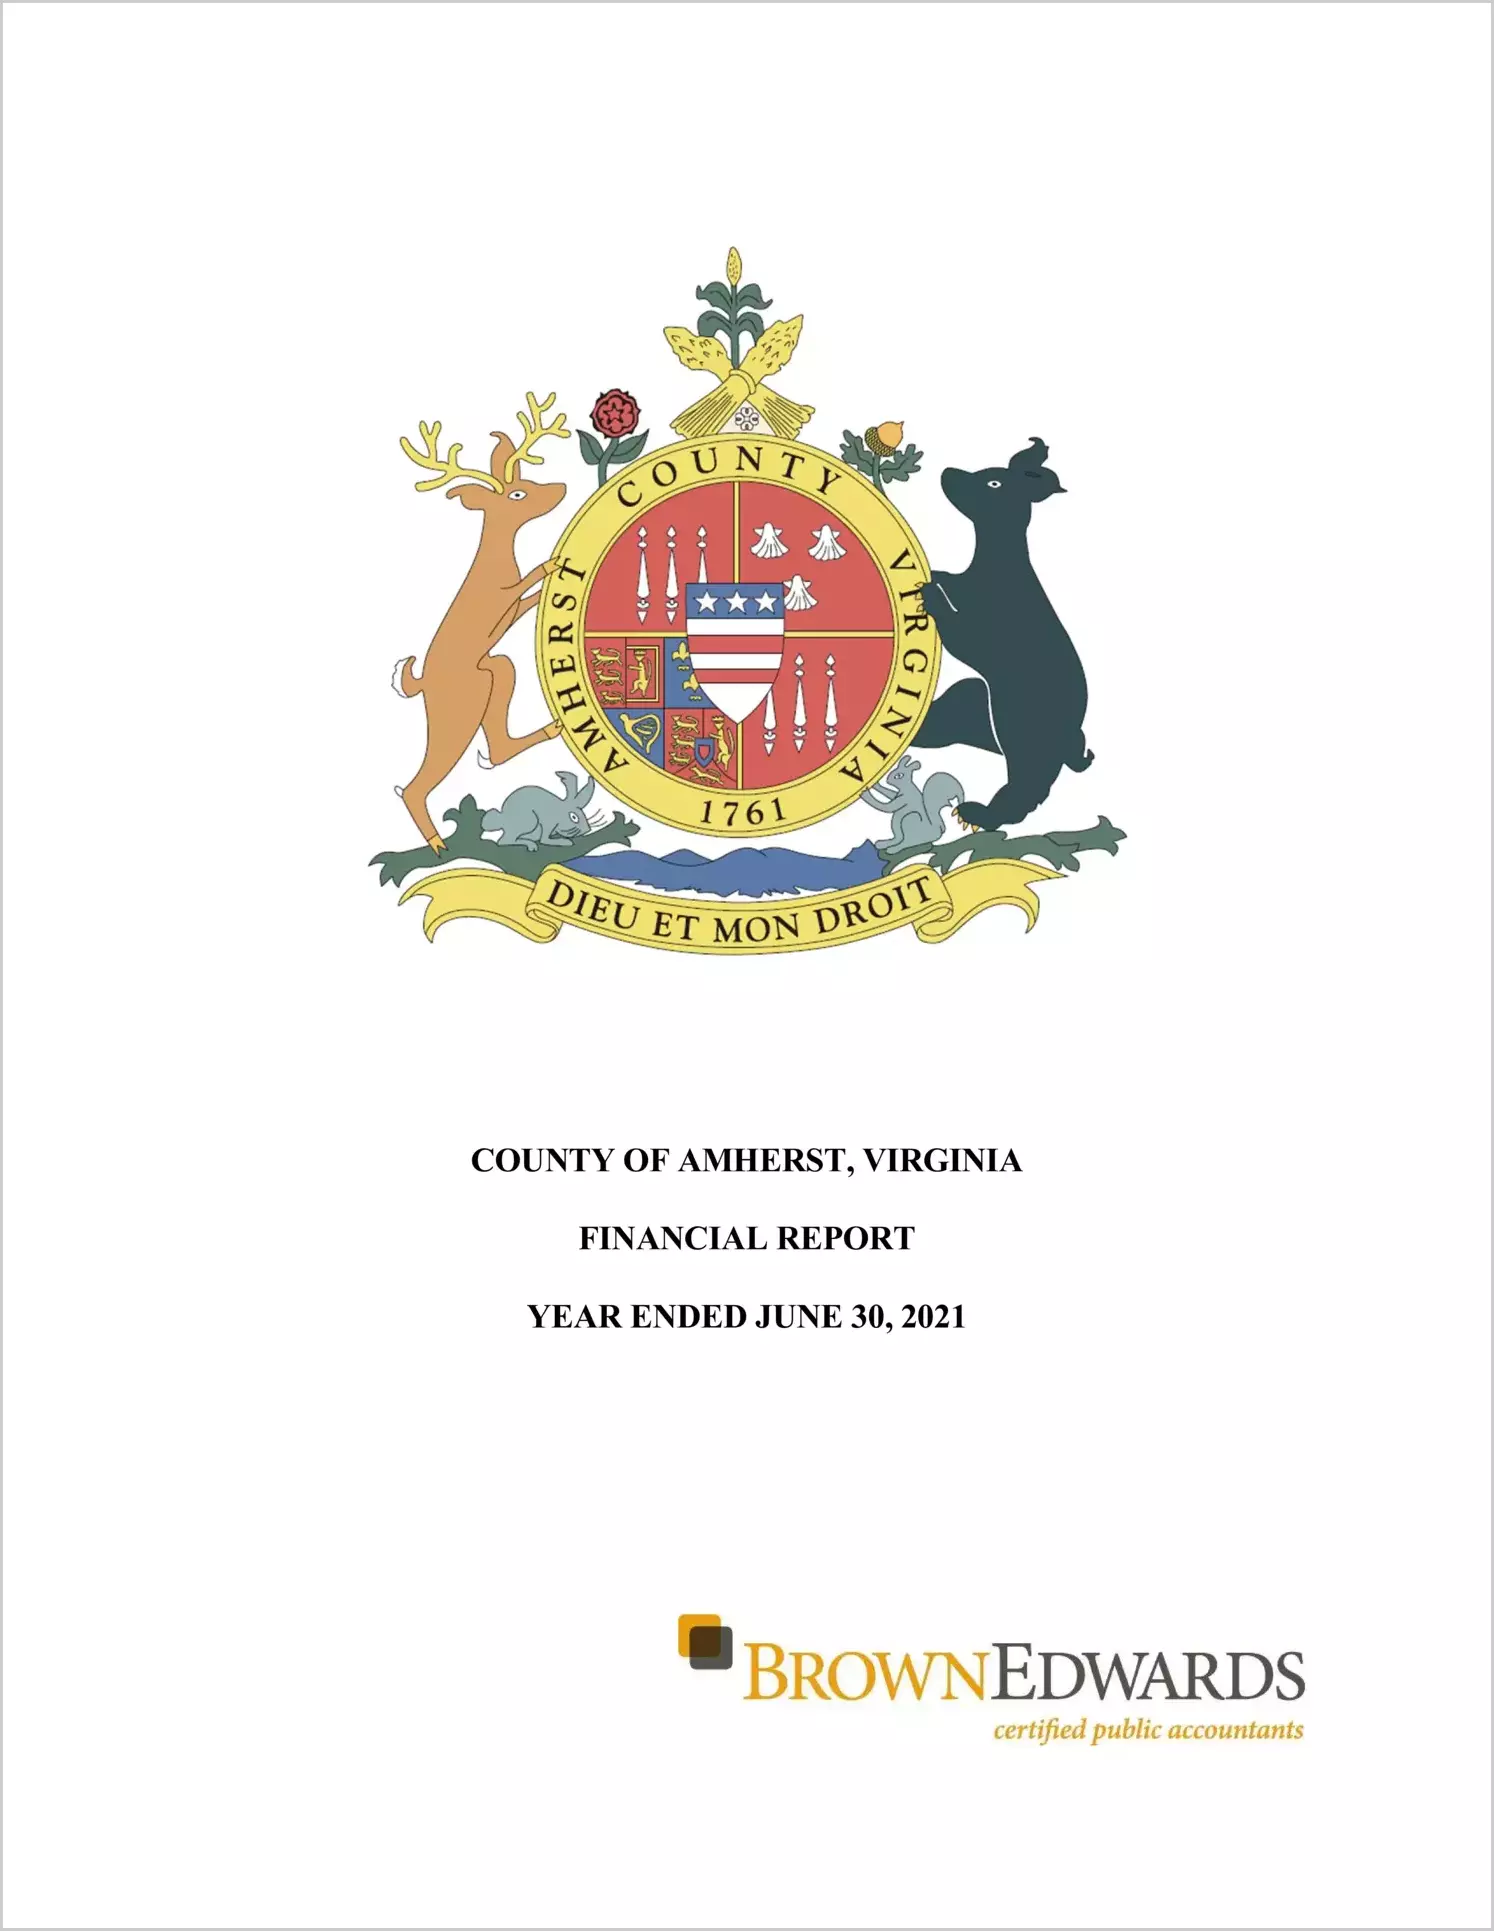 2021 Annual Financial Report for County of Amherst